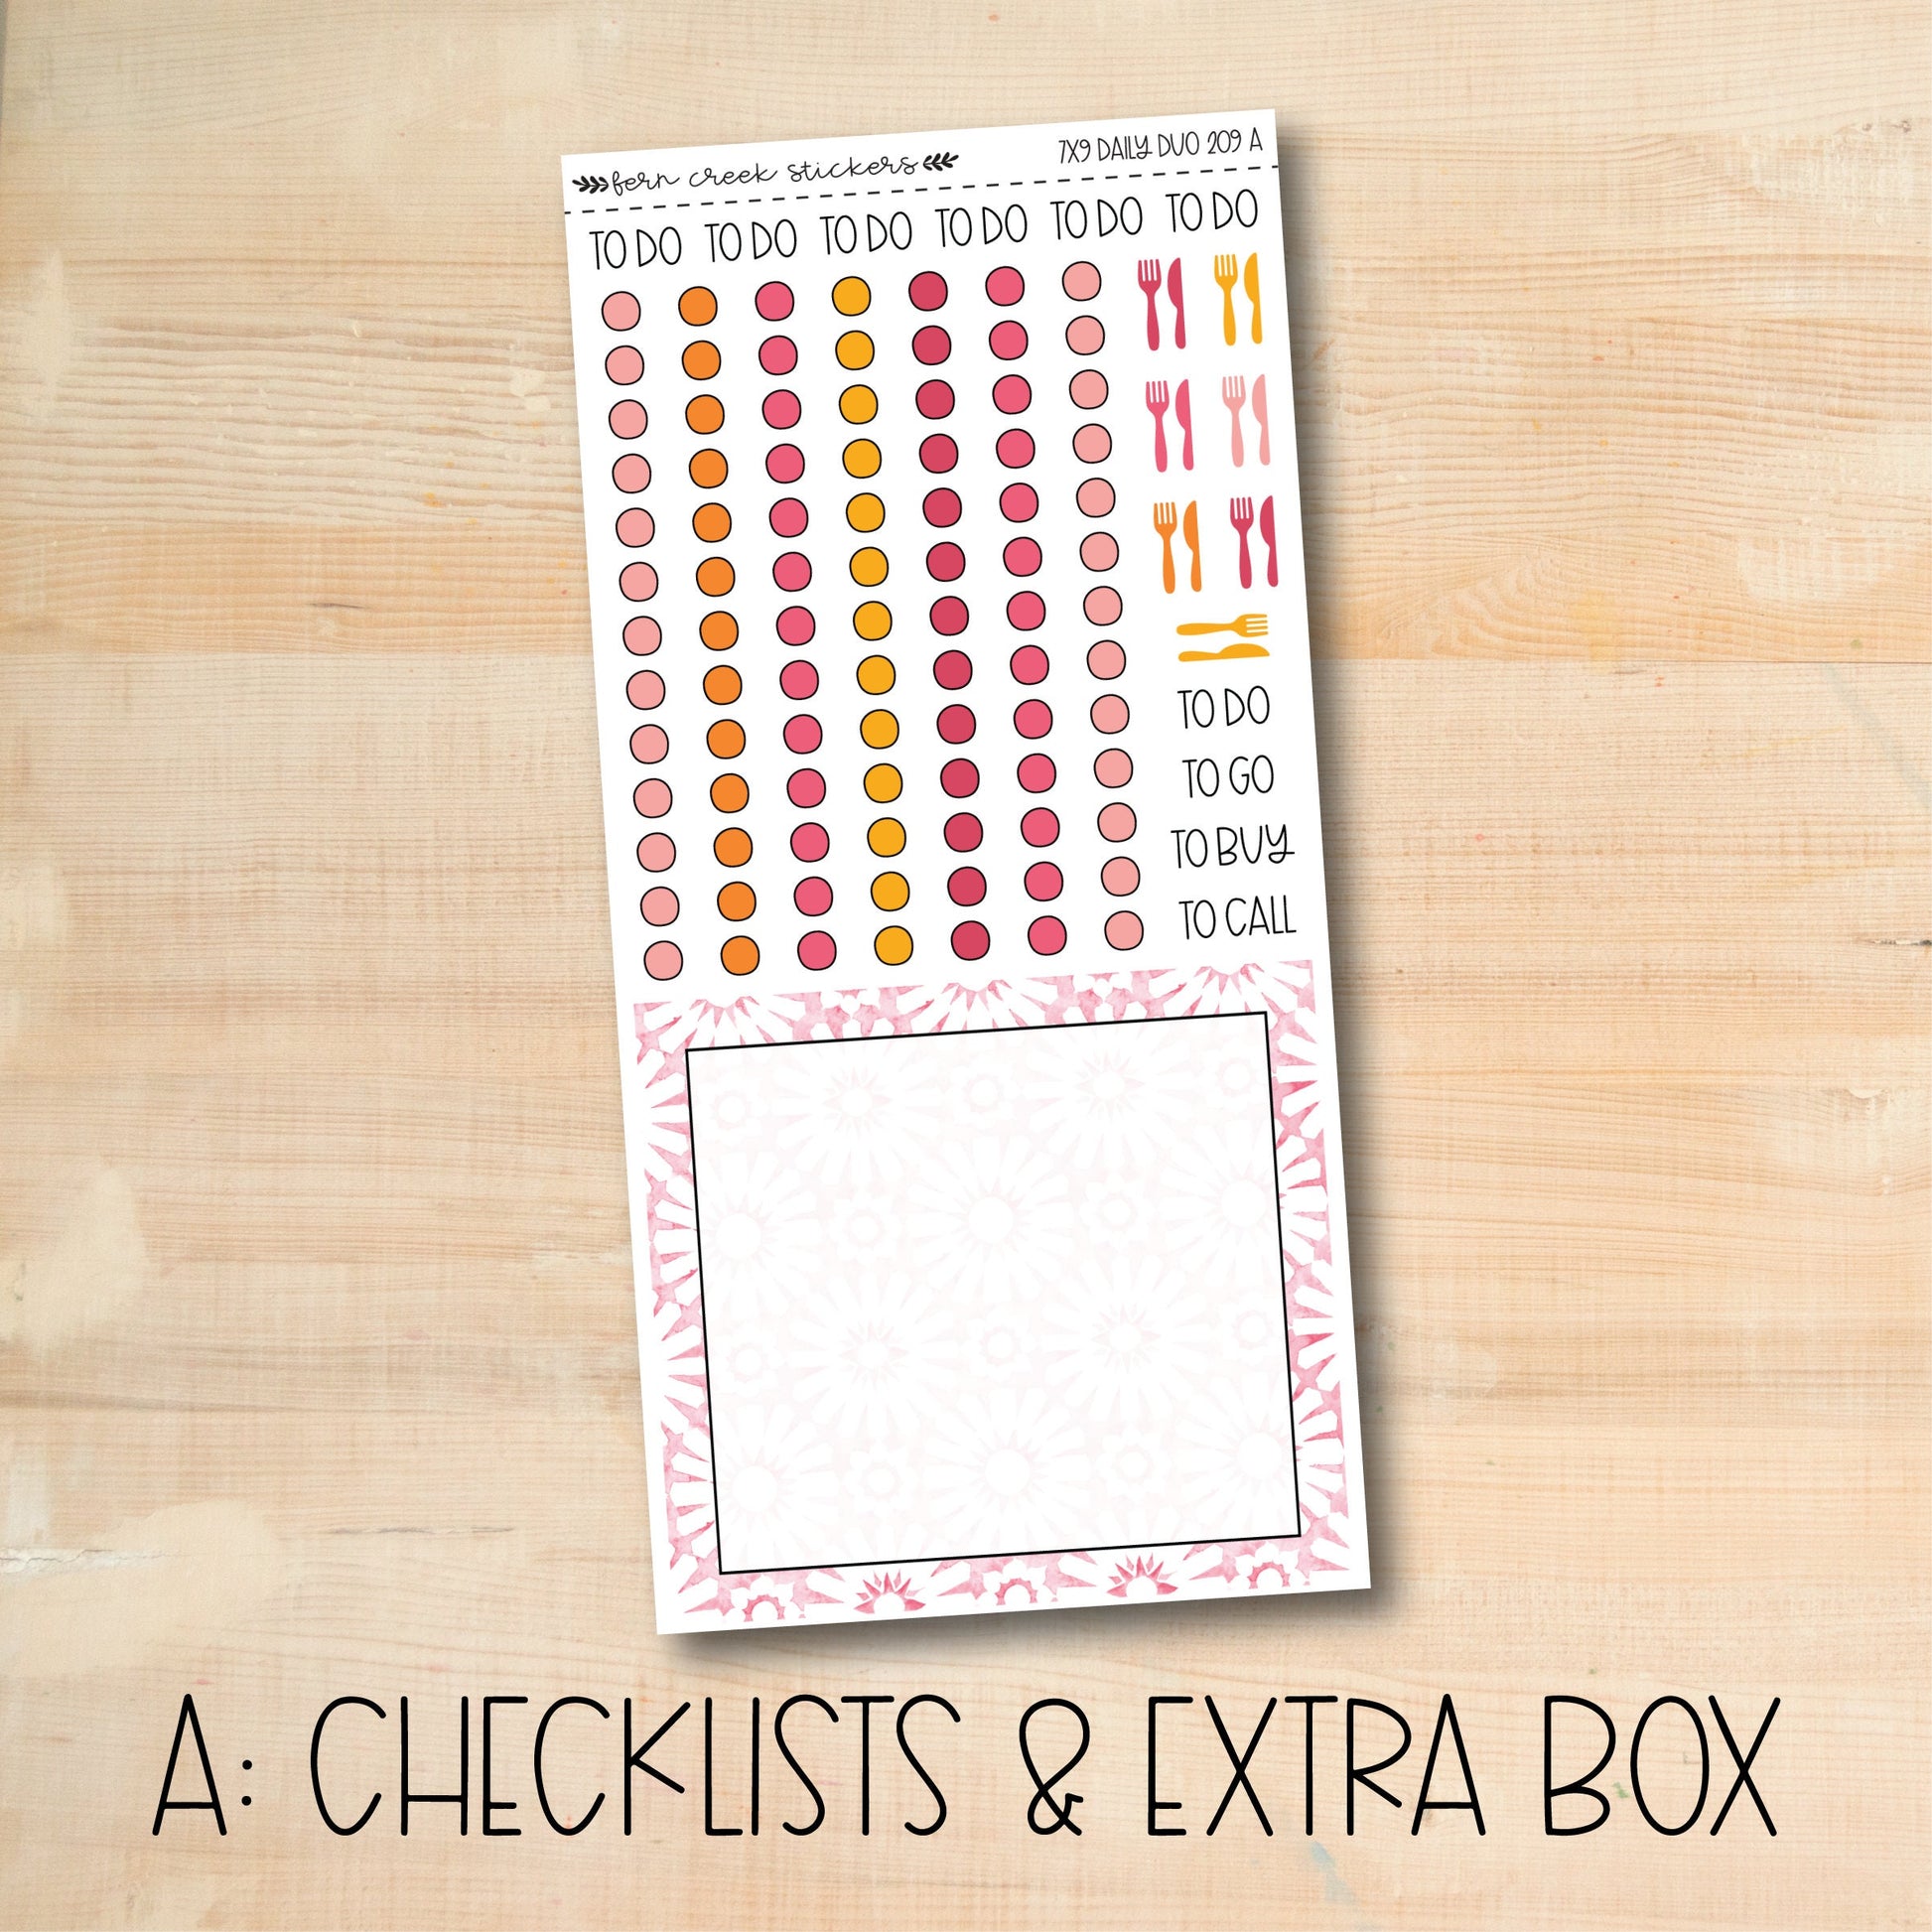 a checklist and extra box of stickers on a wooden surface